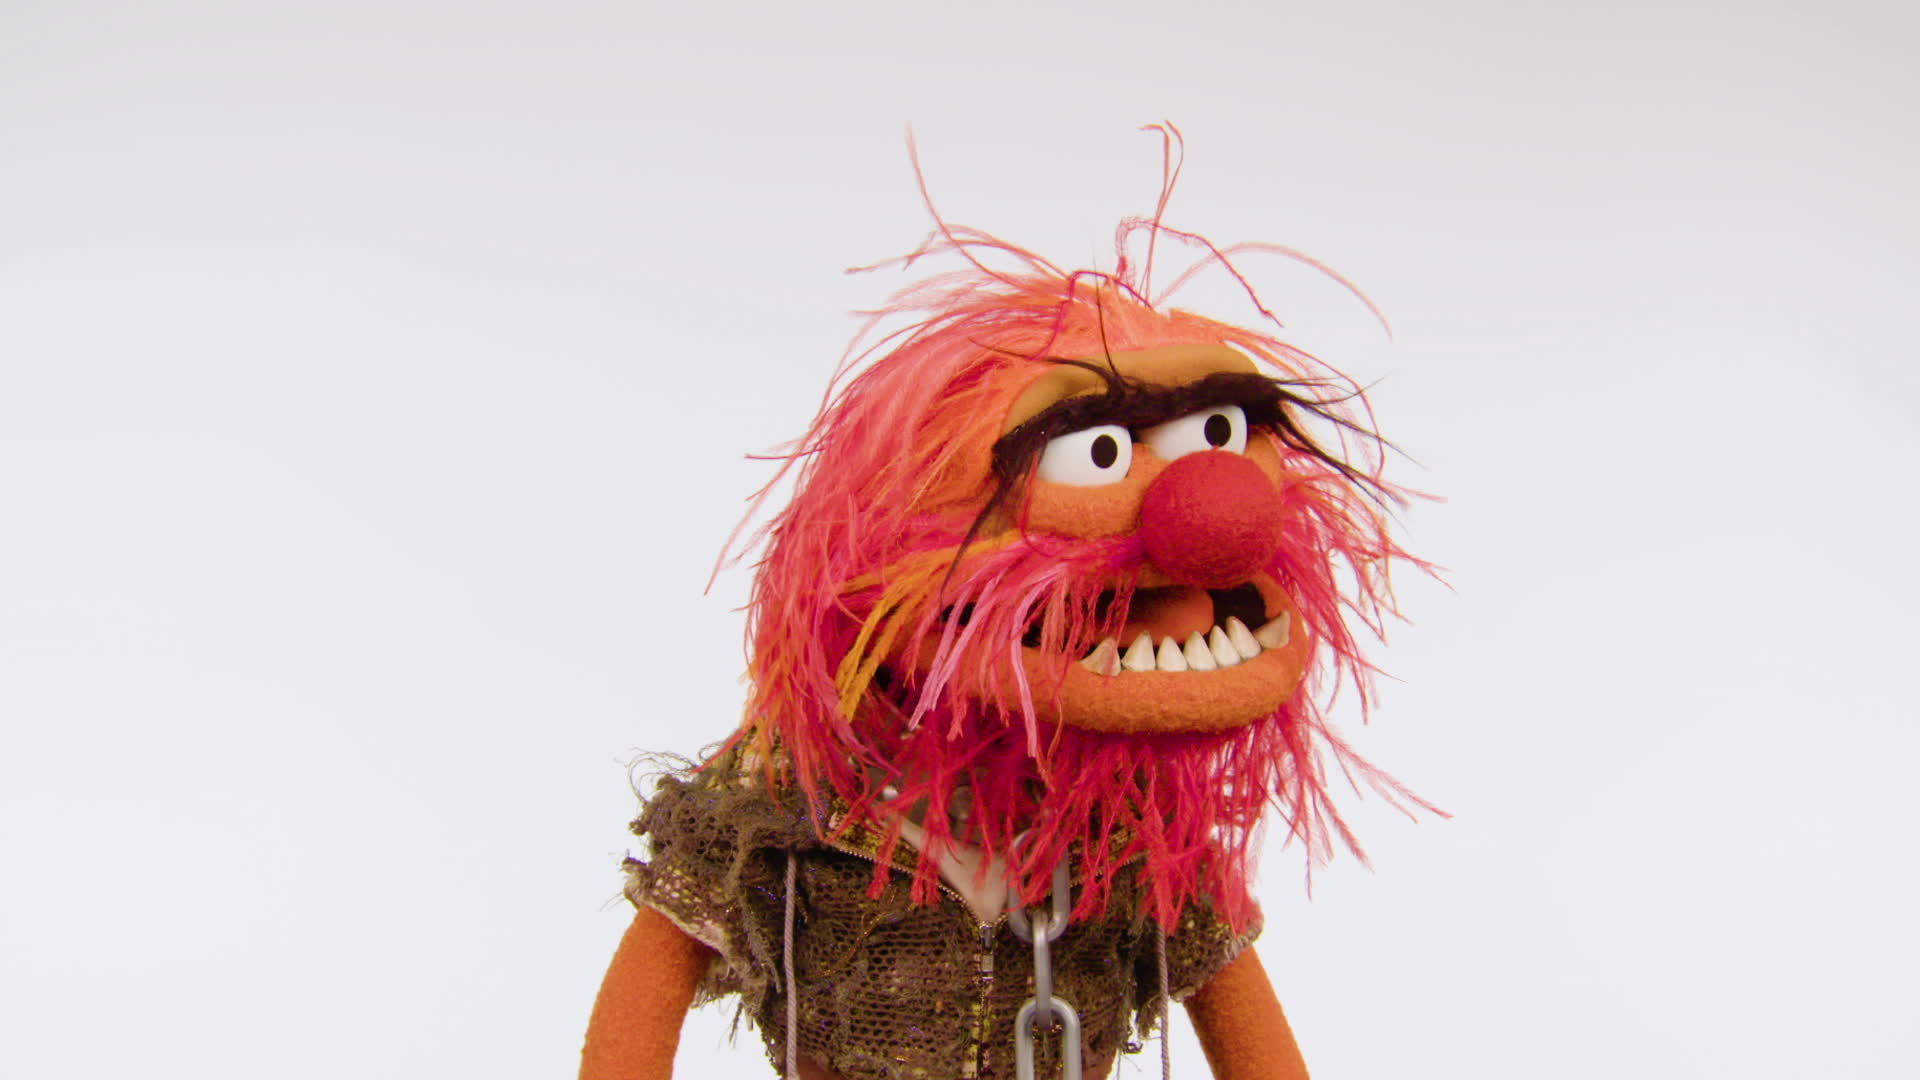 Animal Shares Some Deep Thinking | Muppet Thought of the Week by The Muppets